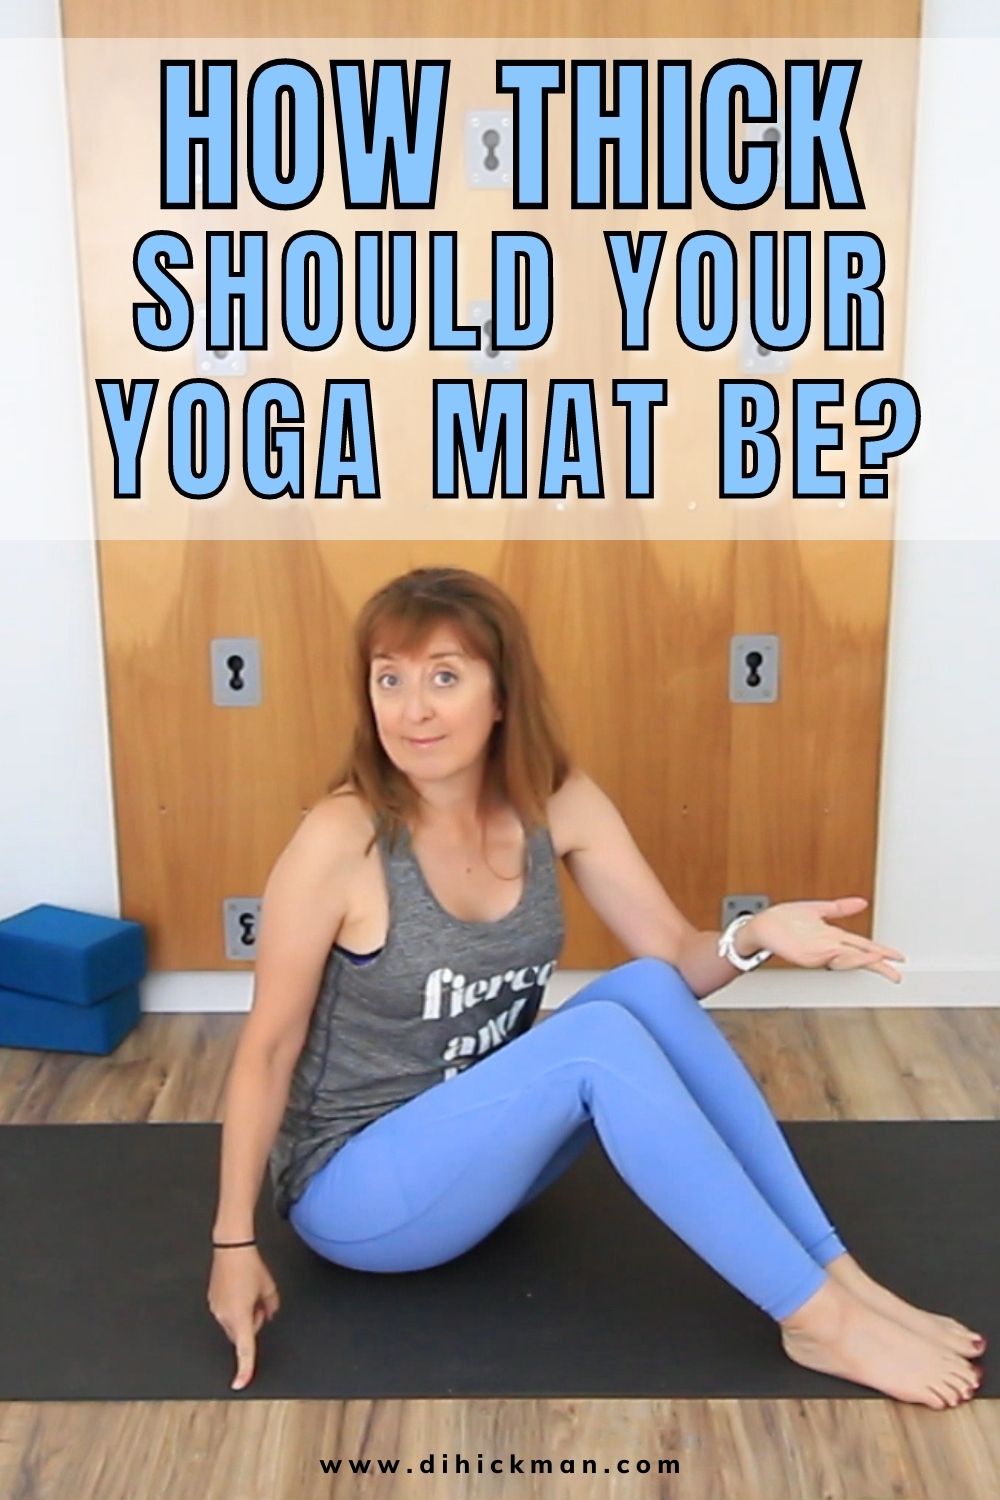 How thick should your yoga mat be?